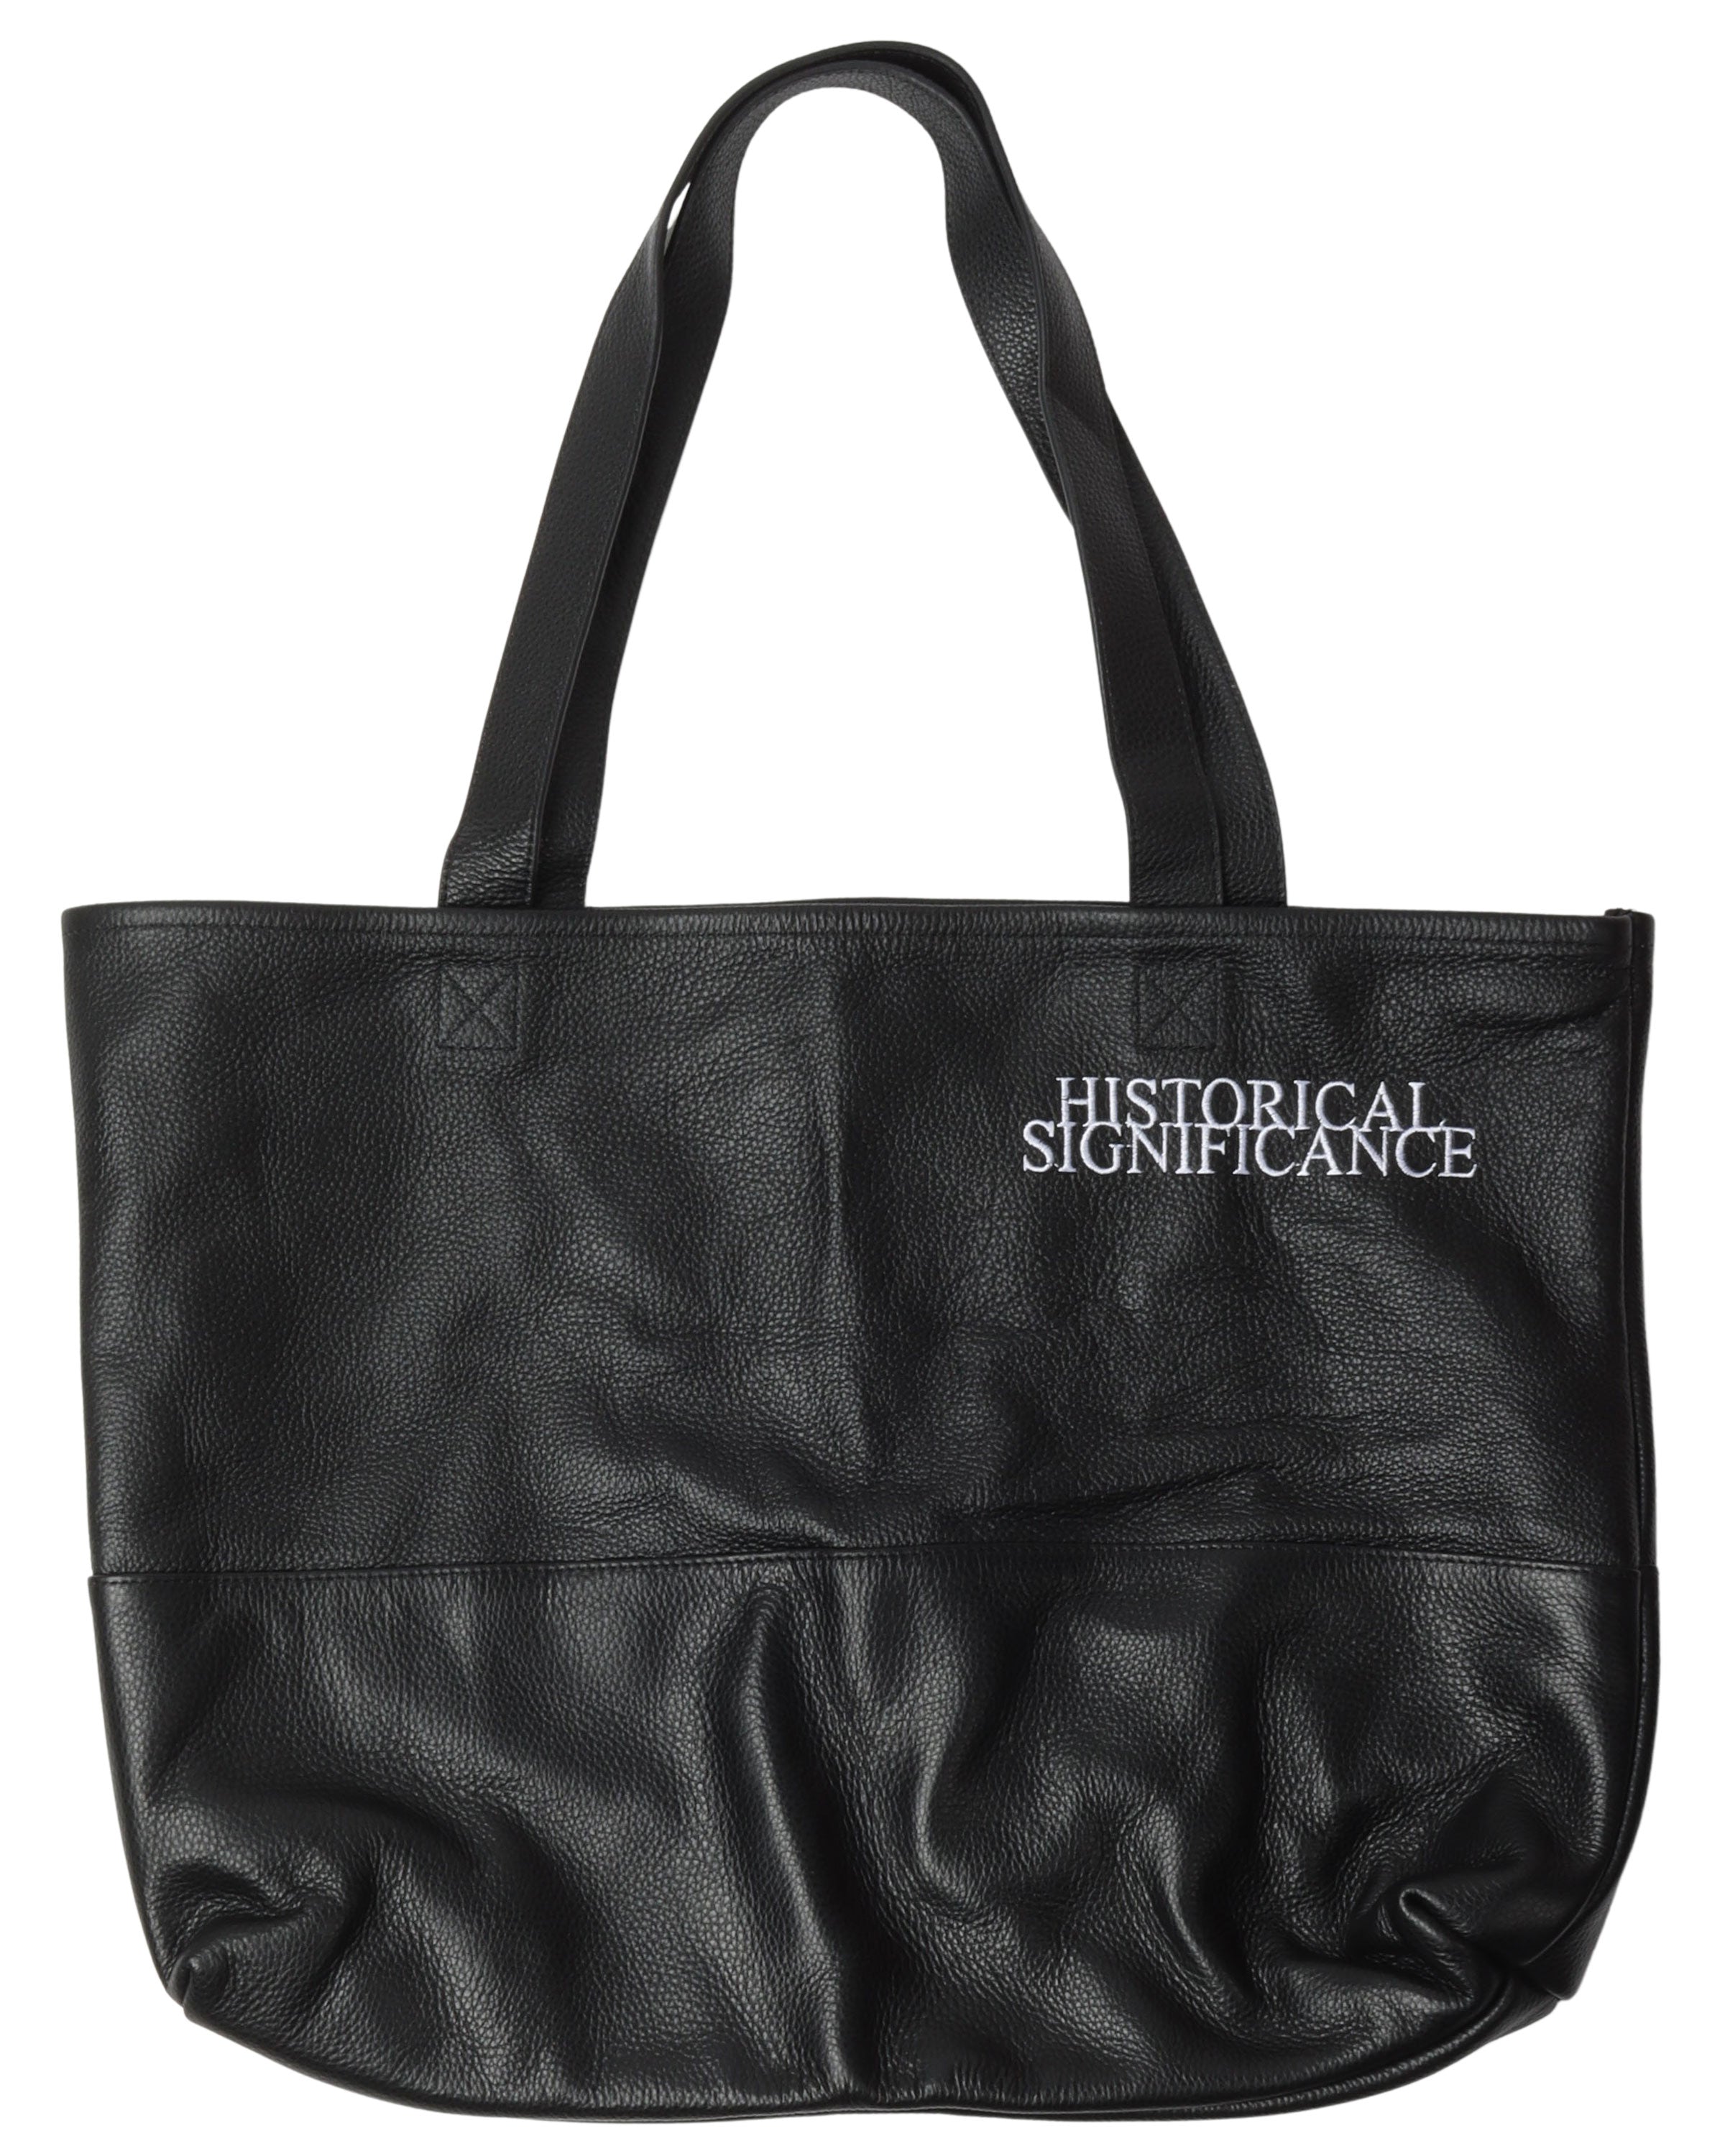 "Historical Significance" Leather Tote Bag